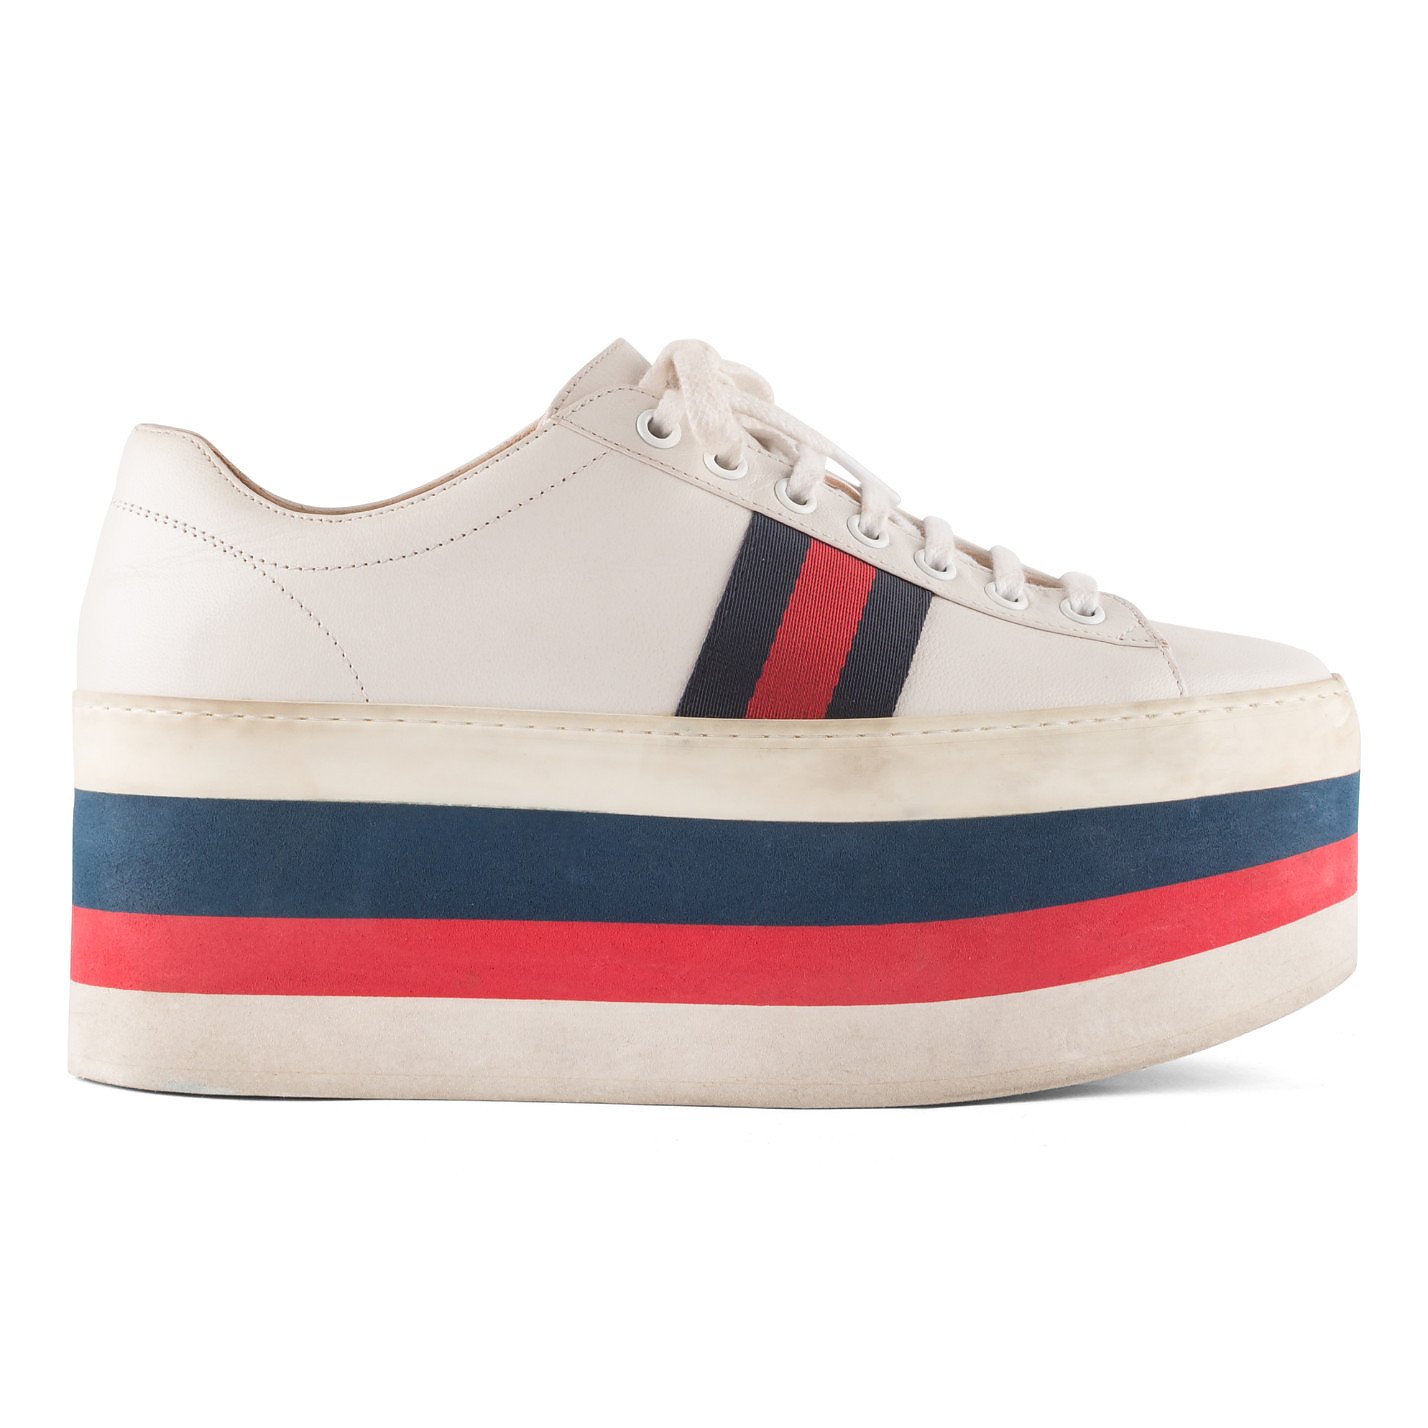 1987 gucci sneakers,Save up to 19%,www.ilcascinone.com